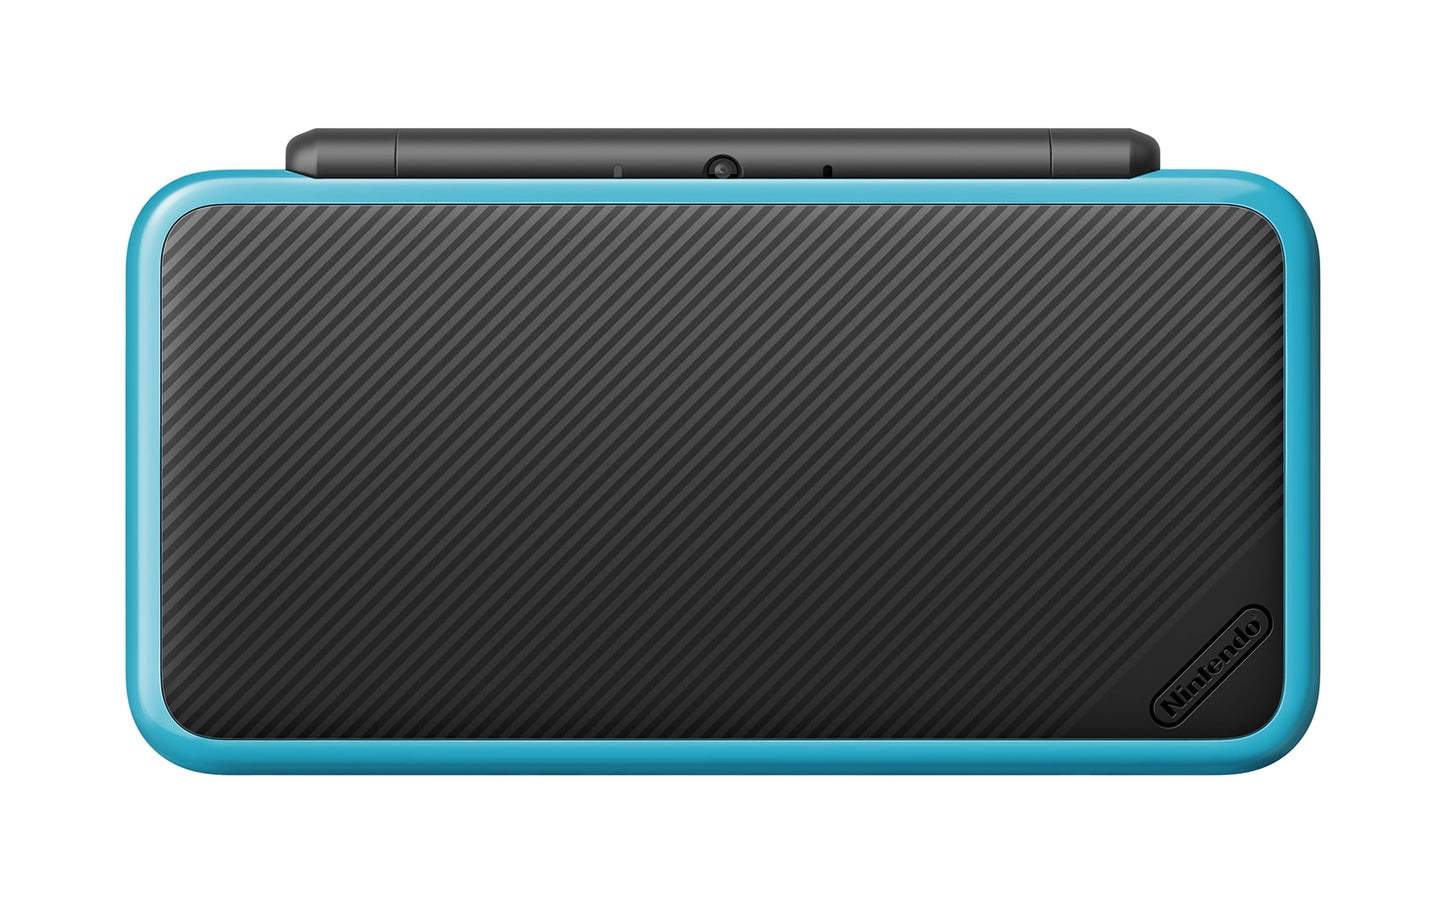 Nintendo 2DS XL Portable Gaming Console, Black & Turquoise